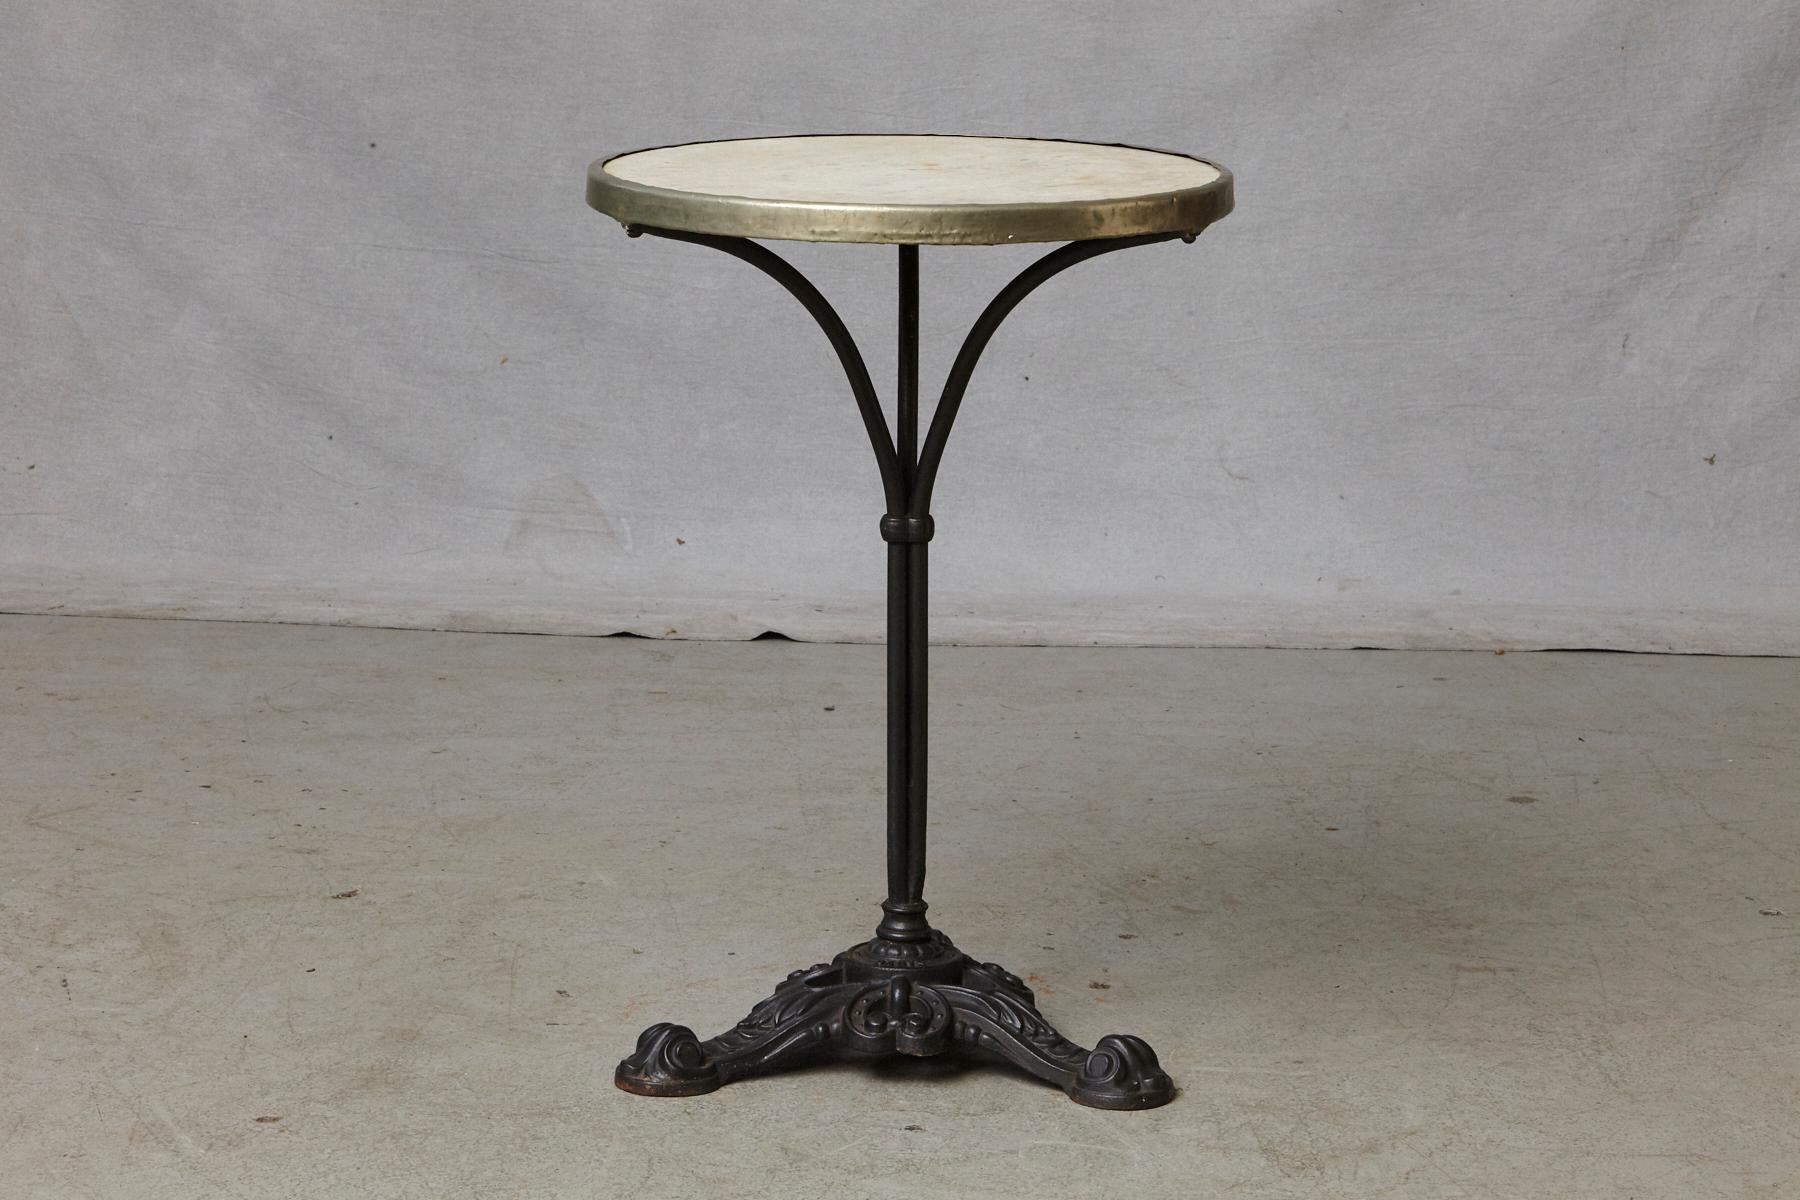 Antique French Bistro table, marble top with original brass rim mounted on a black painted cast iron tripod base, circa 1920s. The maker's mark E. Nautre Paris is stamped in the base of the table.
The table has a fantastic patina with typical signs